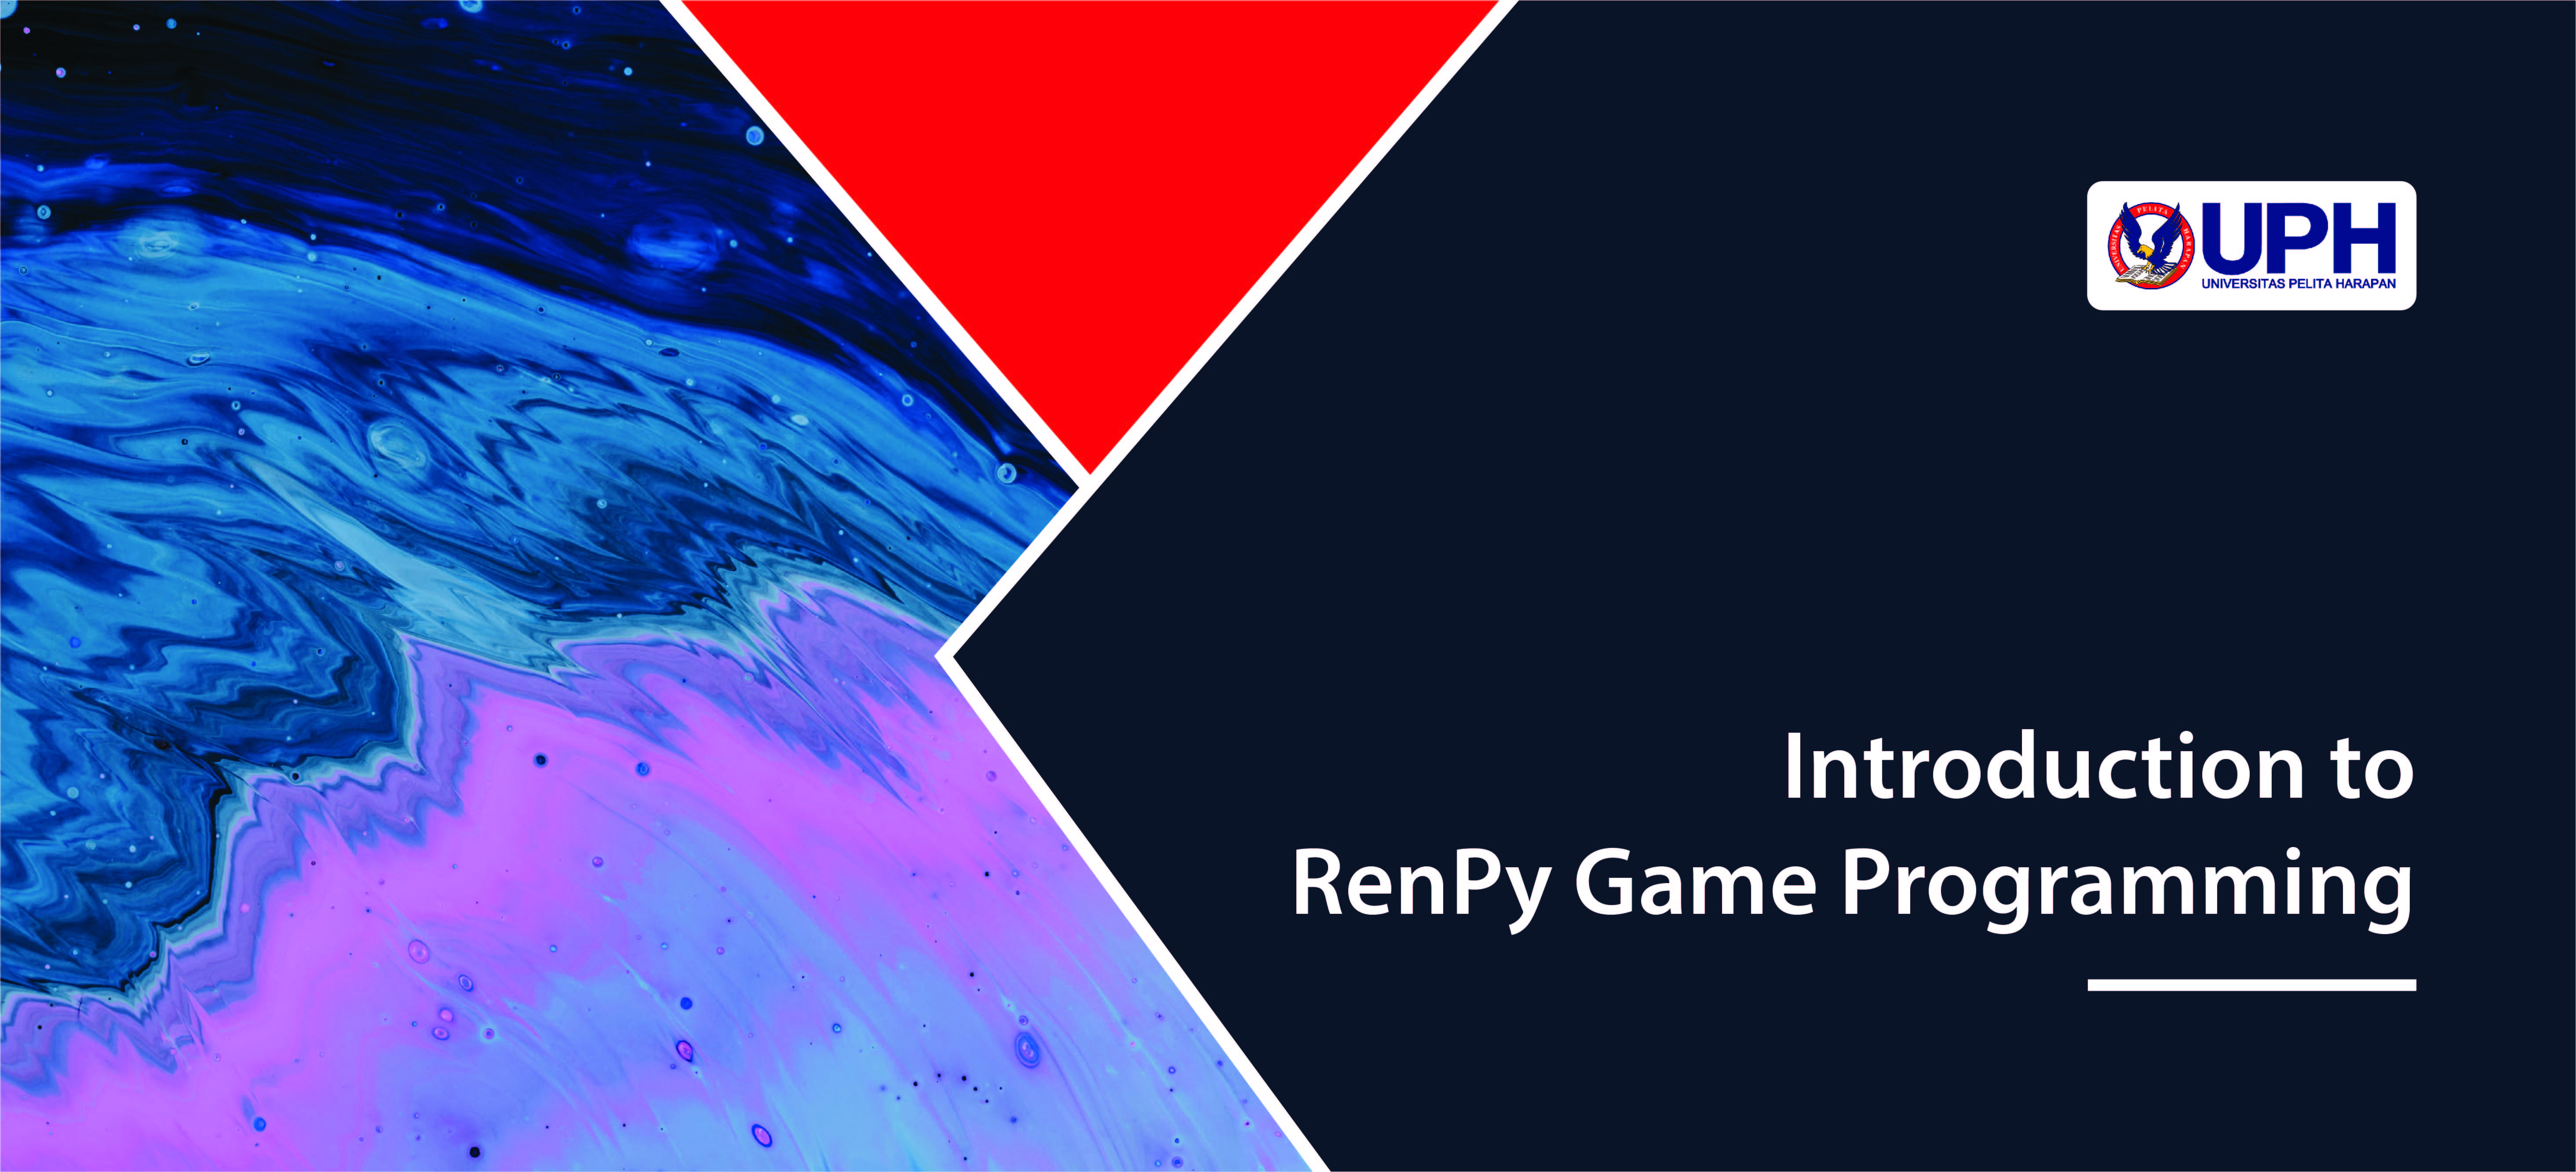 Introduction to RenPy Game Programming MCED0001